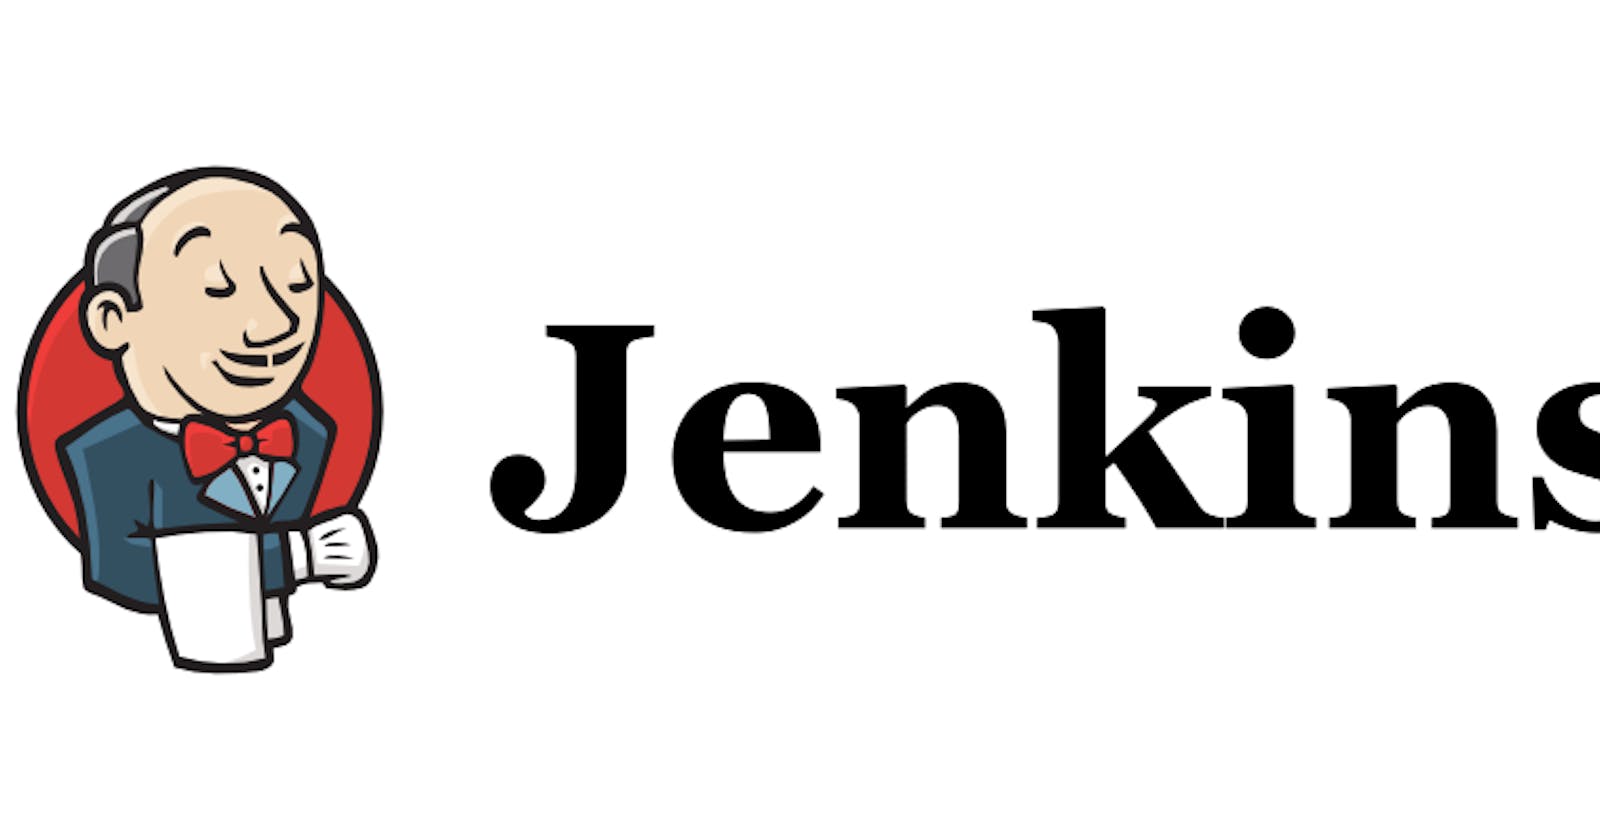 Day 24 Task: Complete Jenkins CI/CD Project